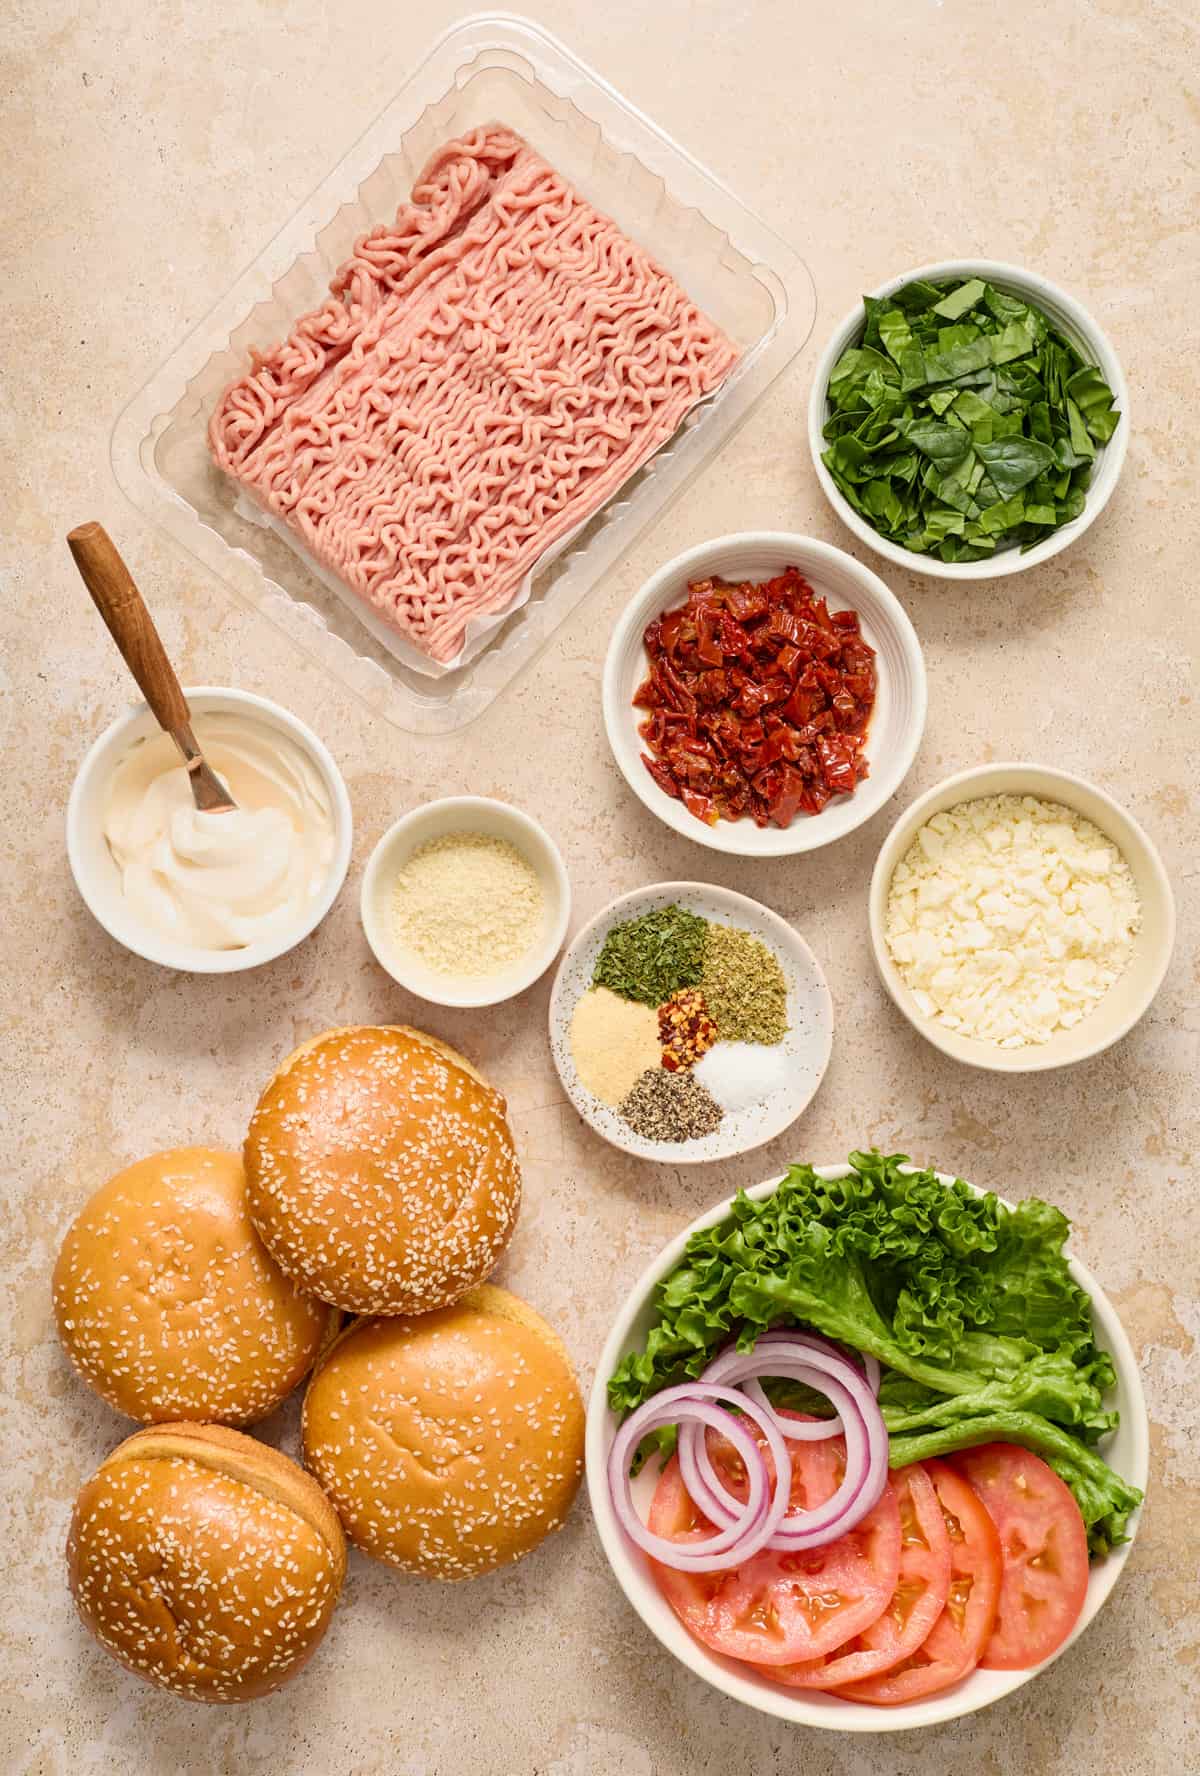 Ground turkey, spinach, seasoning, feta, and other ingredients.